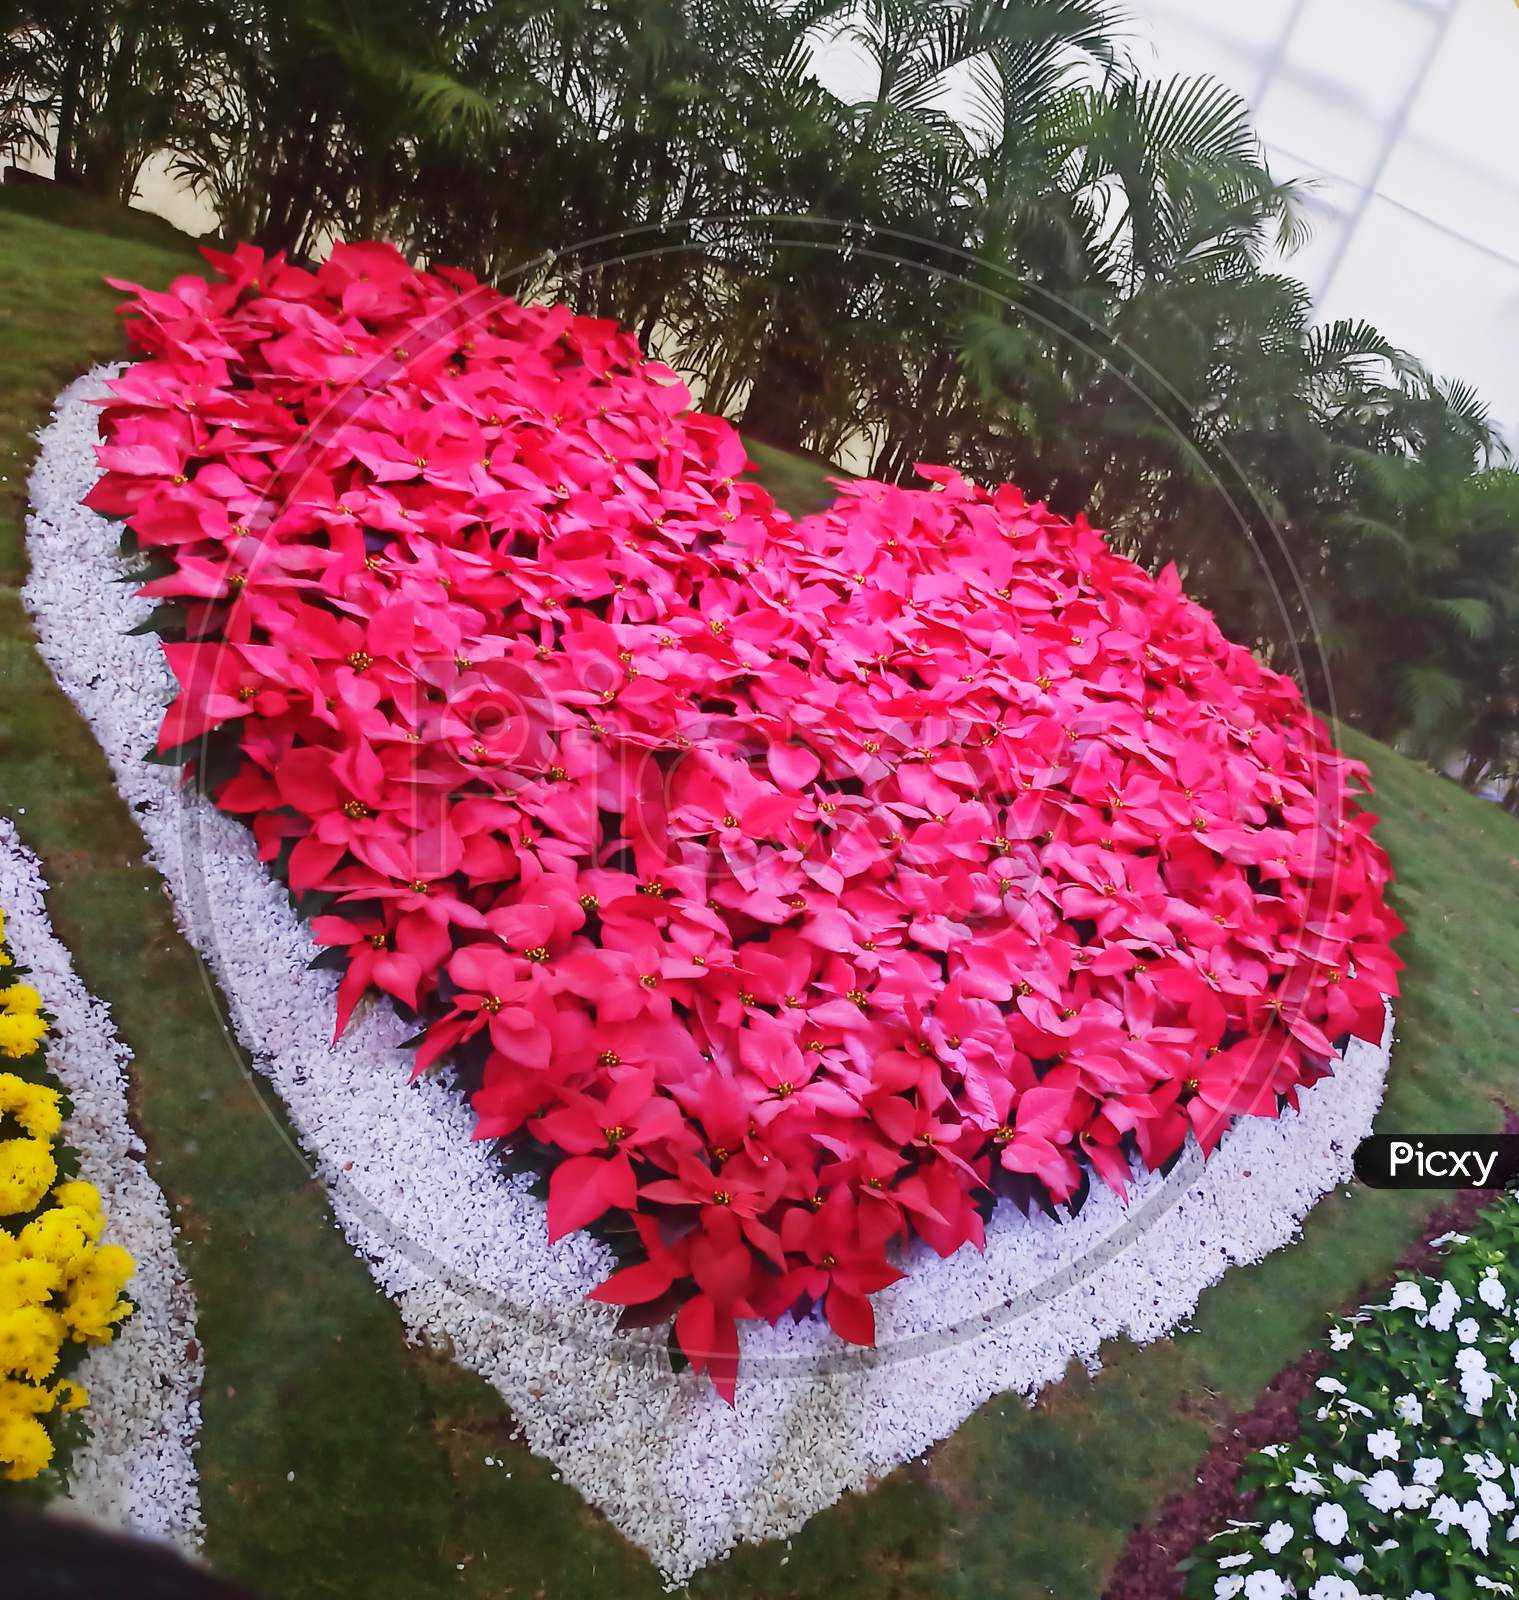 Heart shape design made by plant leaves